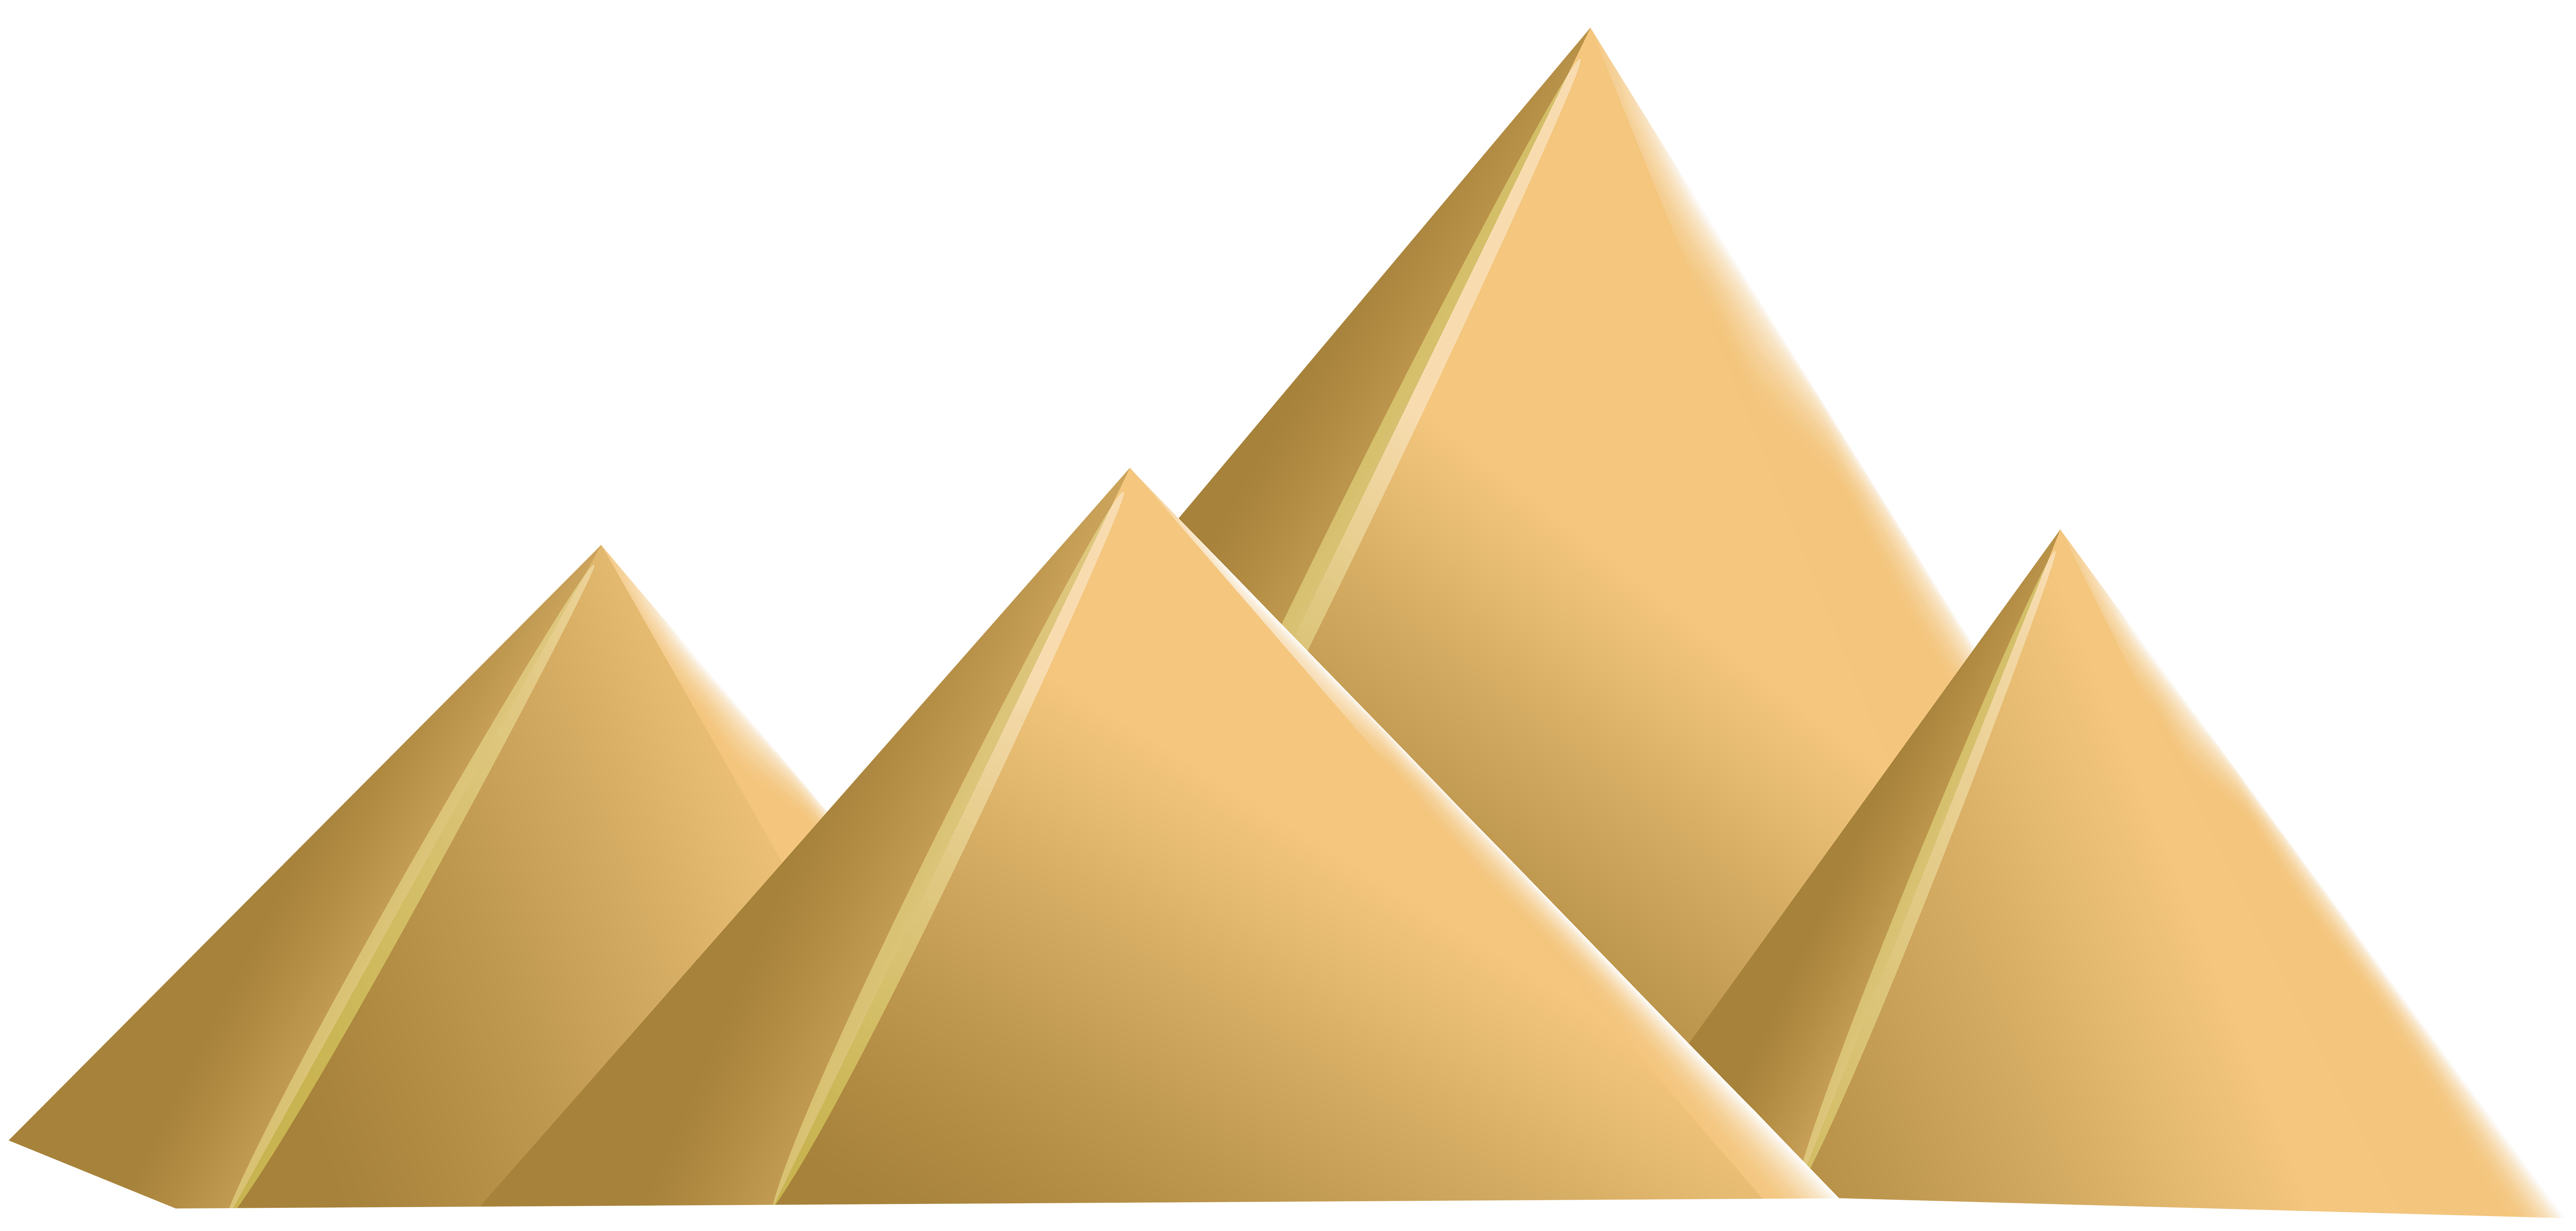 Pyramid Clipart Png Pyramid Clipart Pngpyramid Png Free | Images and ...